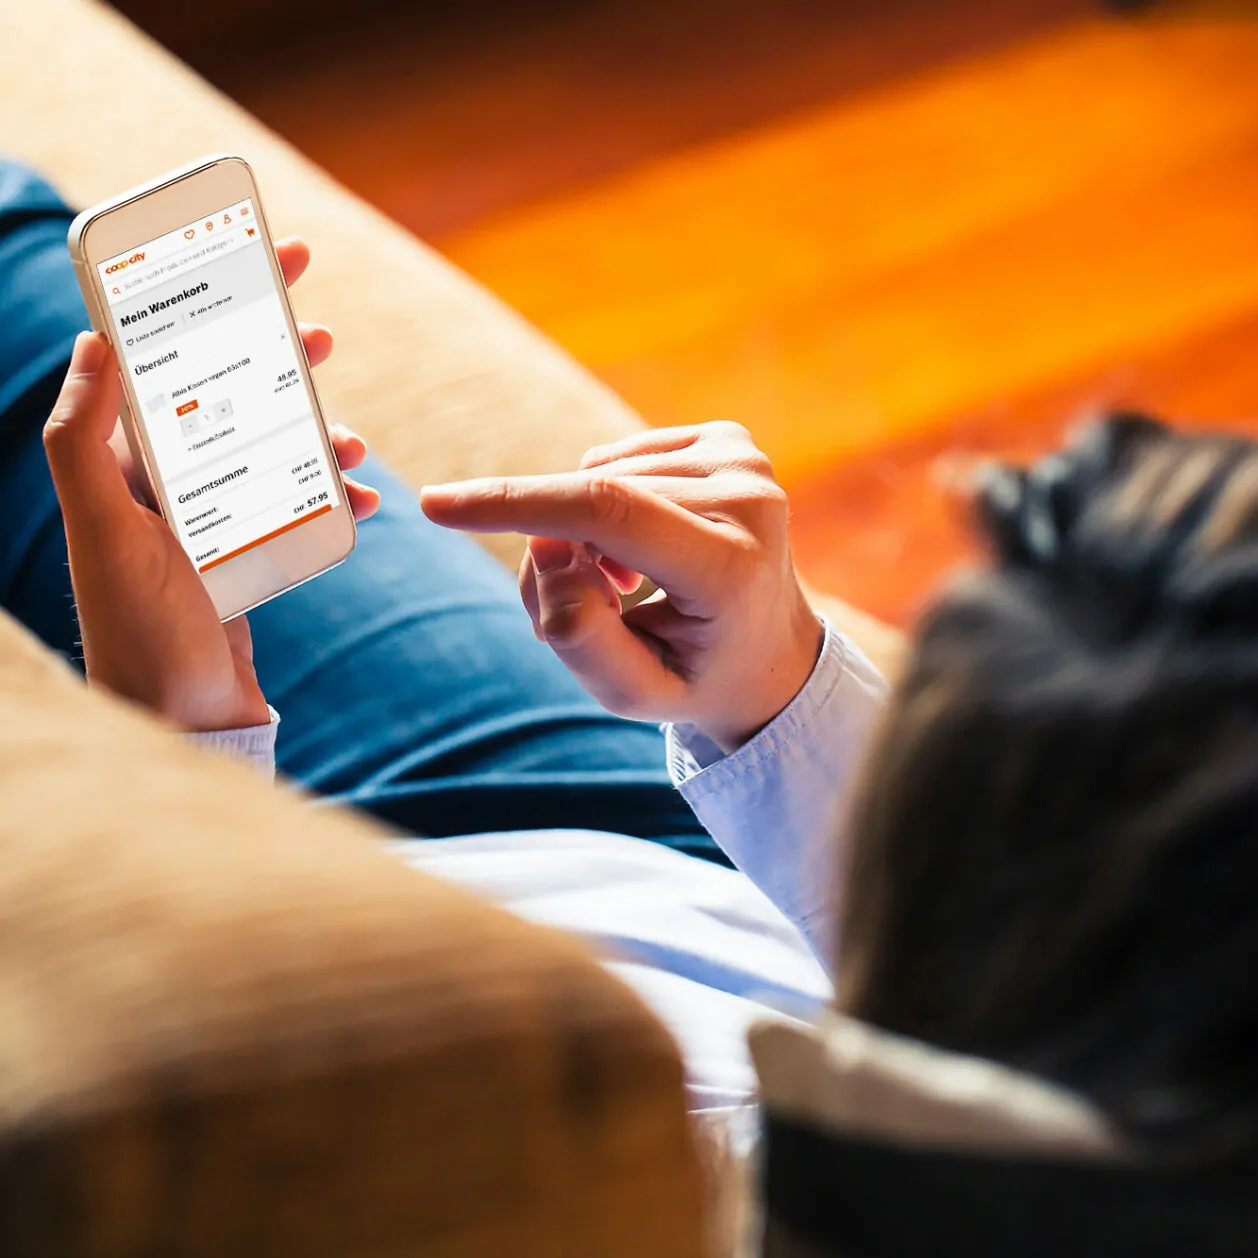 Image of a person lying down with a smartphone in the foreground, SAP Commerce